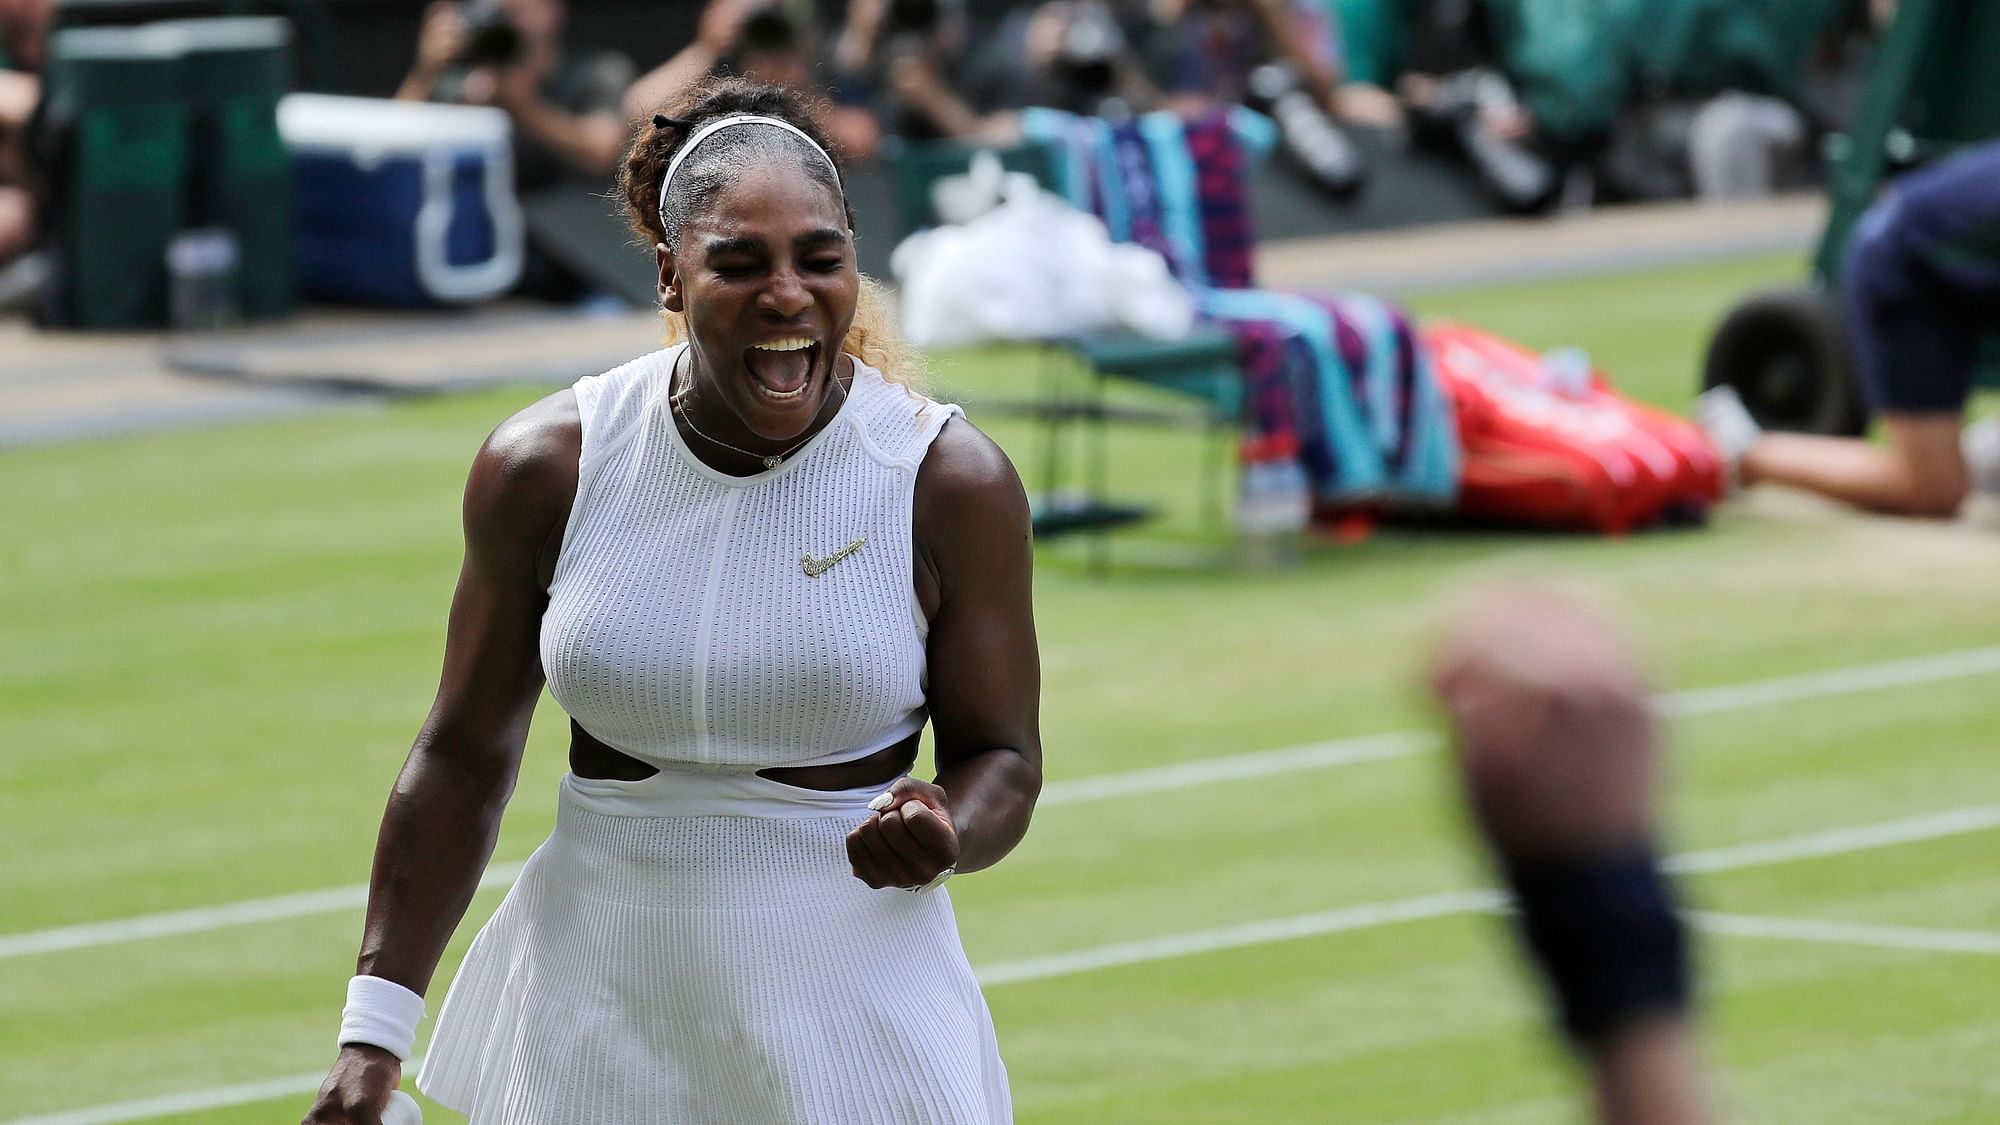 Serena Williams will play in the Wimbledon final for the 11th time and will be looking for her eighth title at the All England Club.